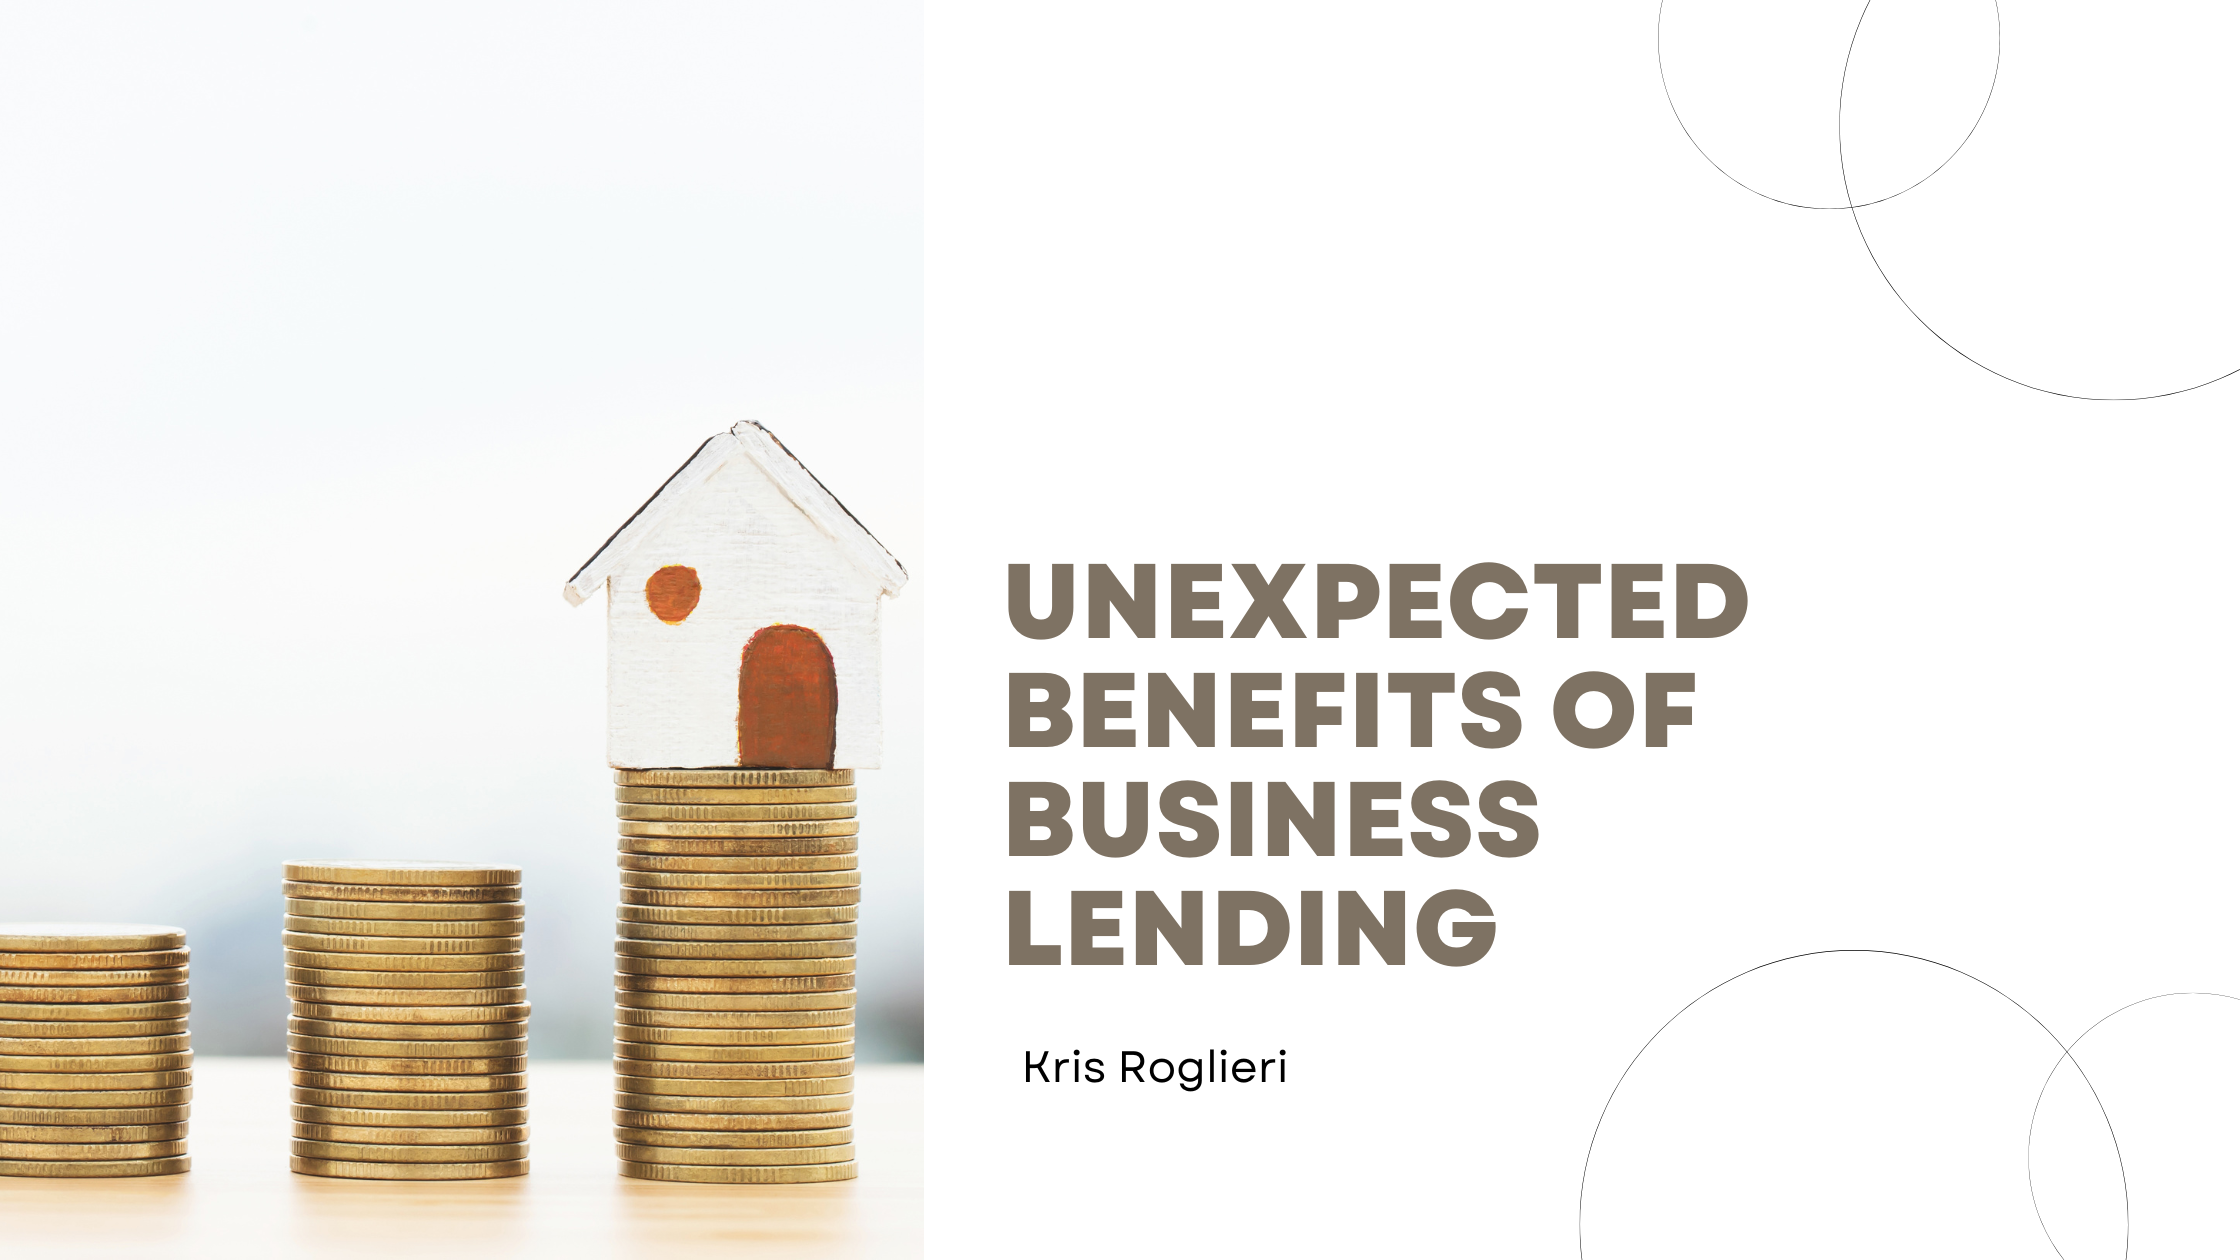 Unexpected Benefits of Business Lending